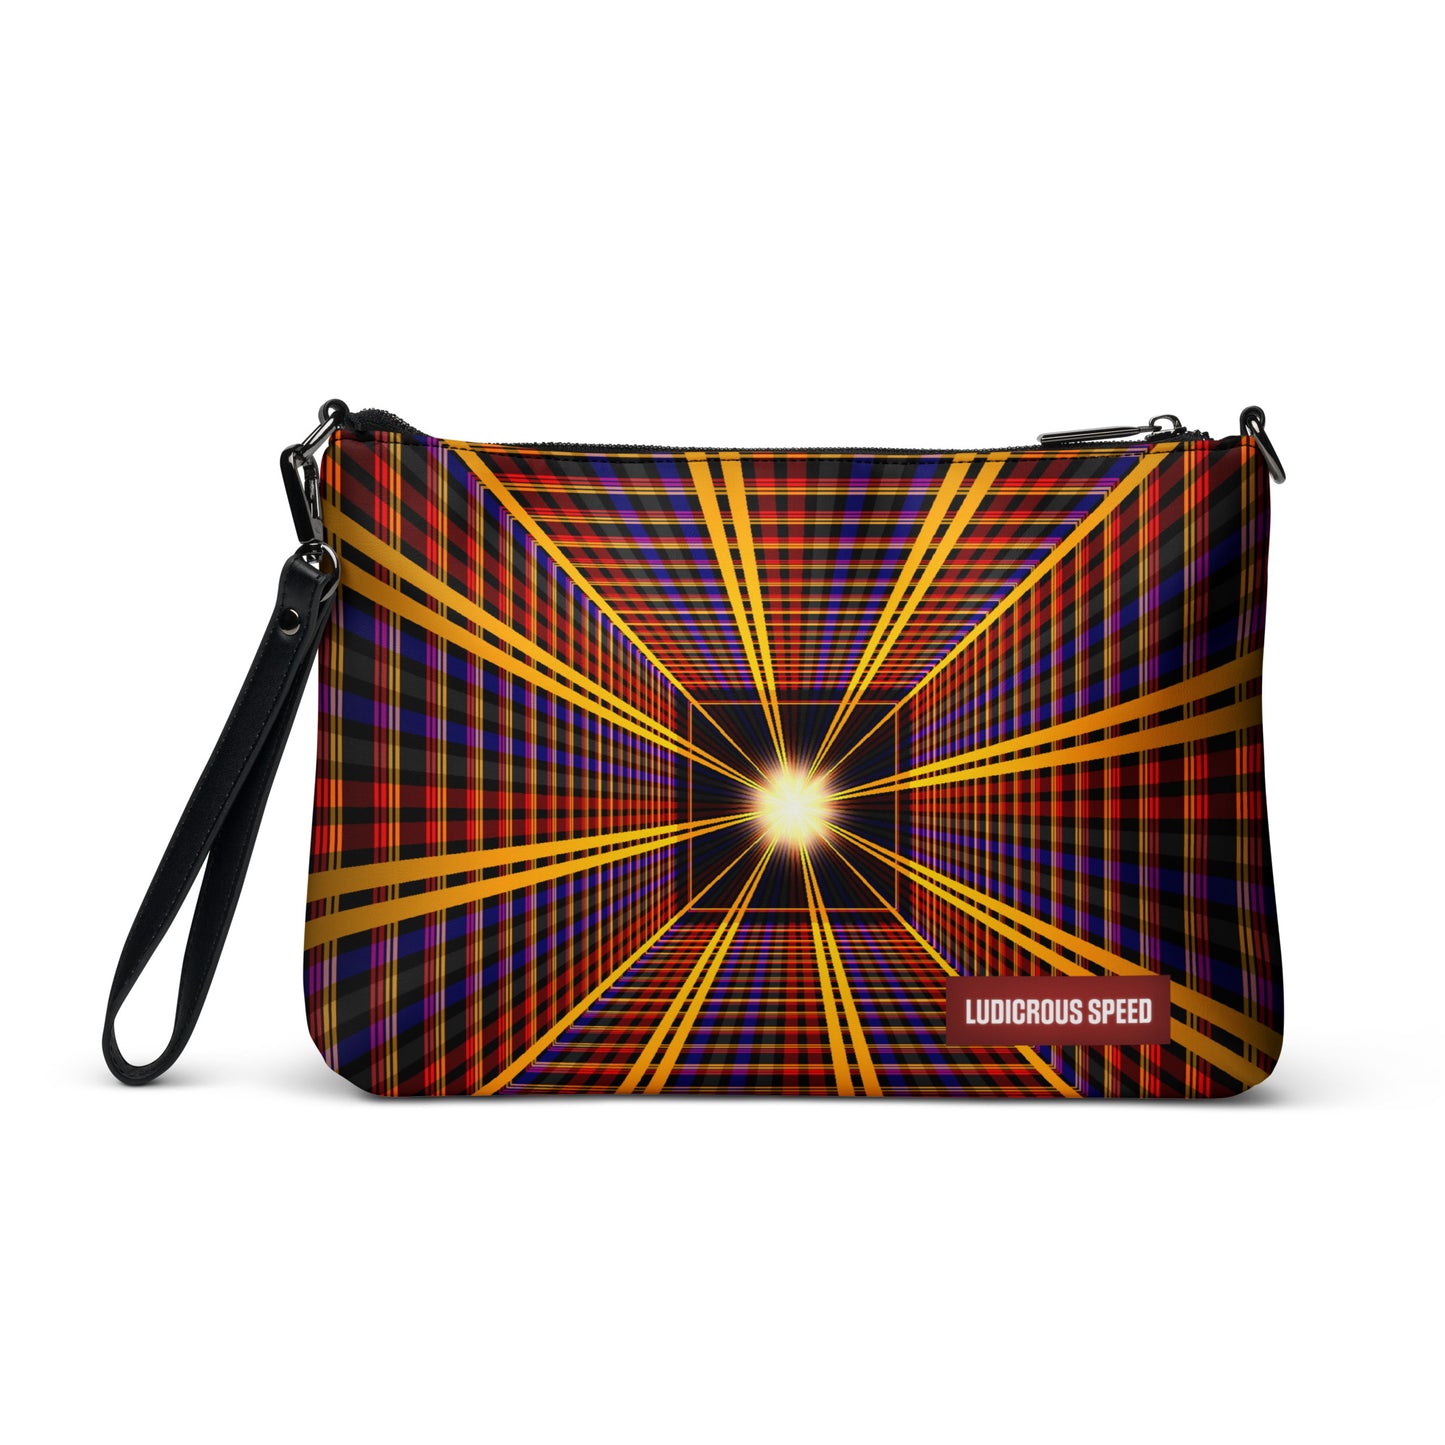 They've Gone To Plaid crossbody bag